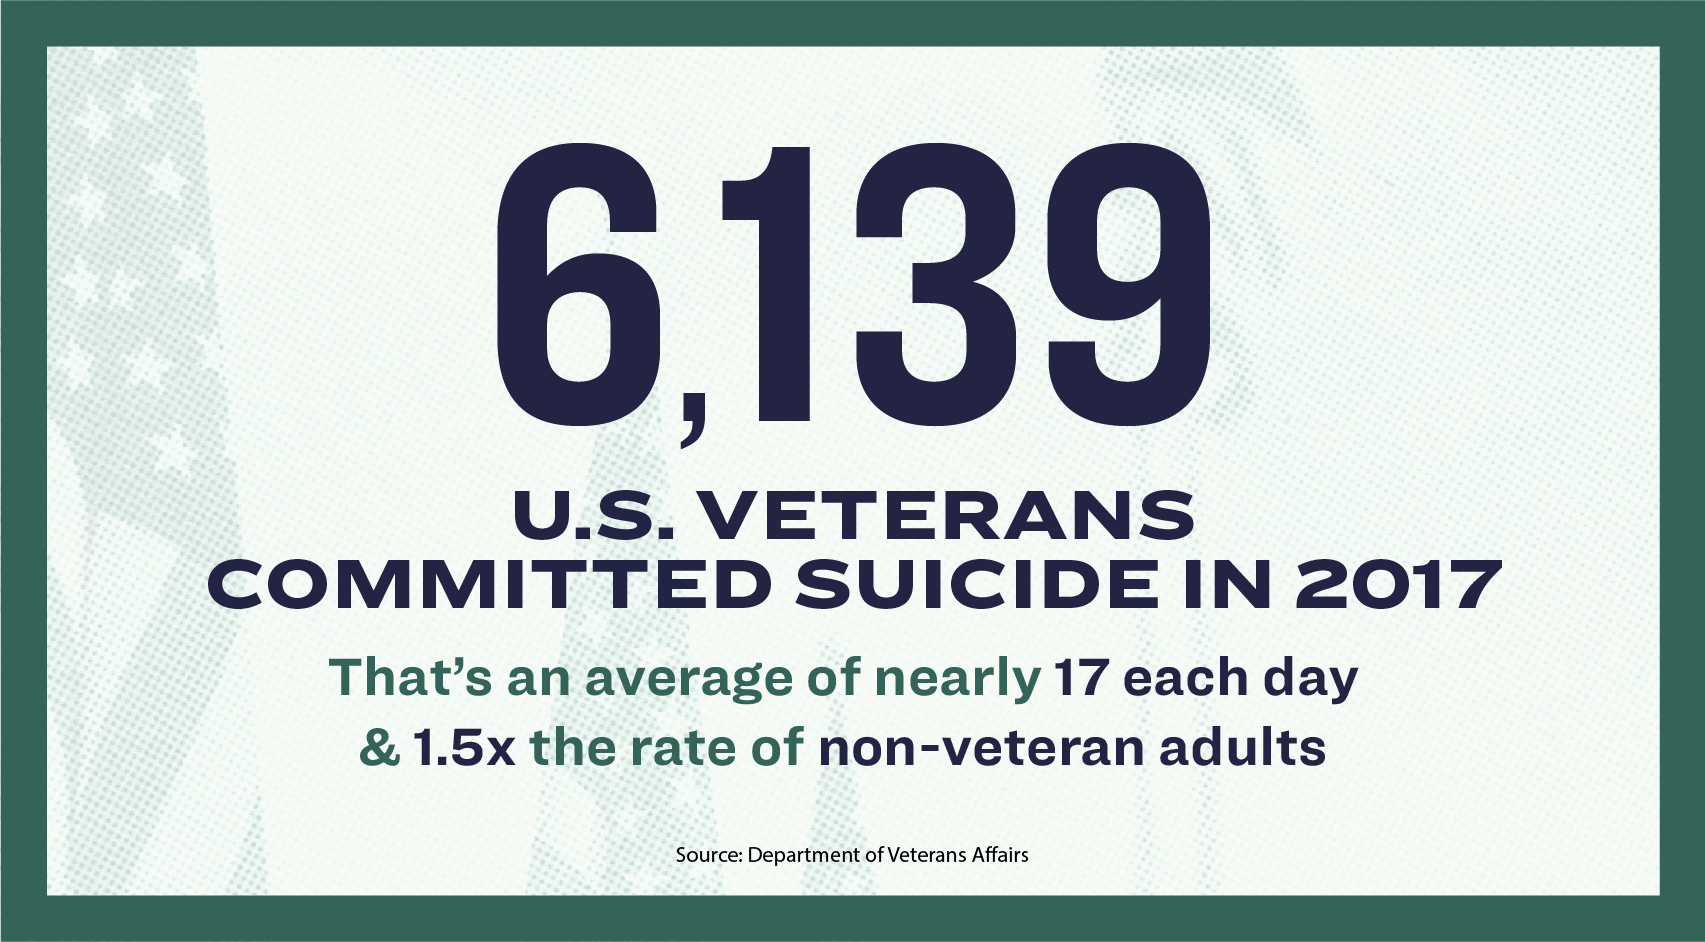 6,139 U.S. veterans committed suicide in 2017. That’s an average of nearly 17 each day and 1.5x the rate of non-veterans.
 